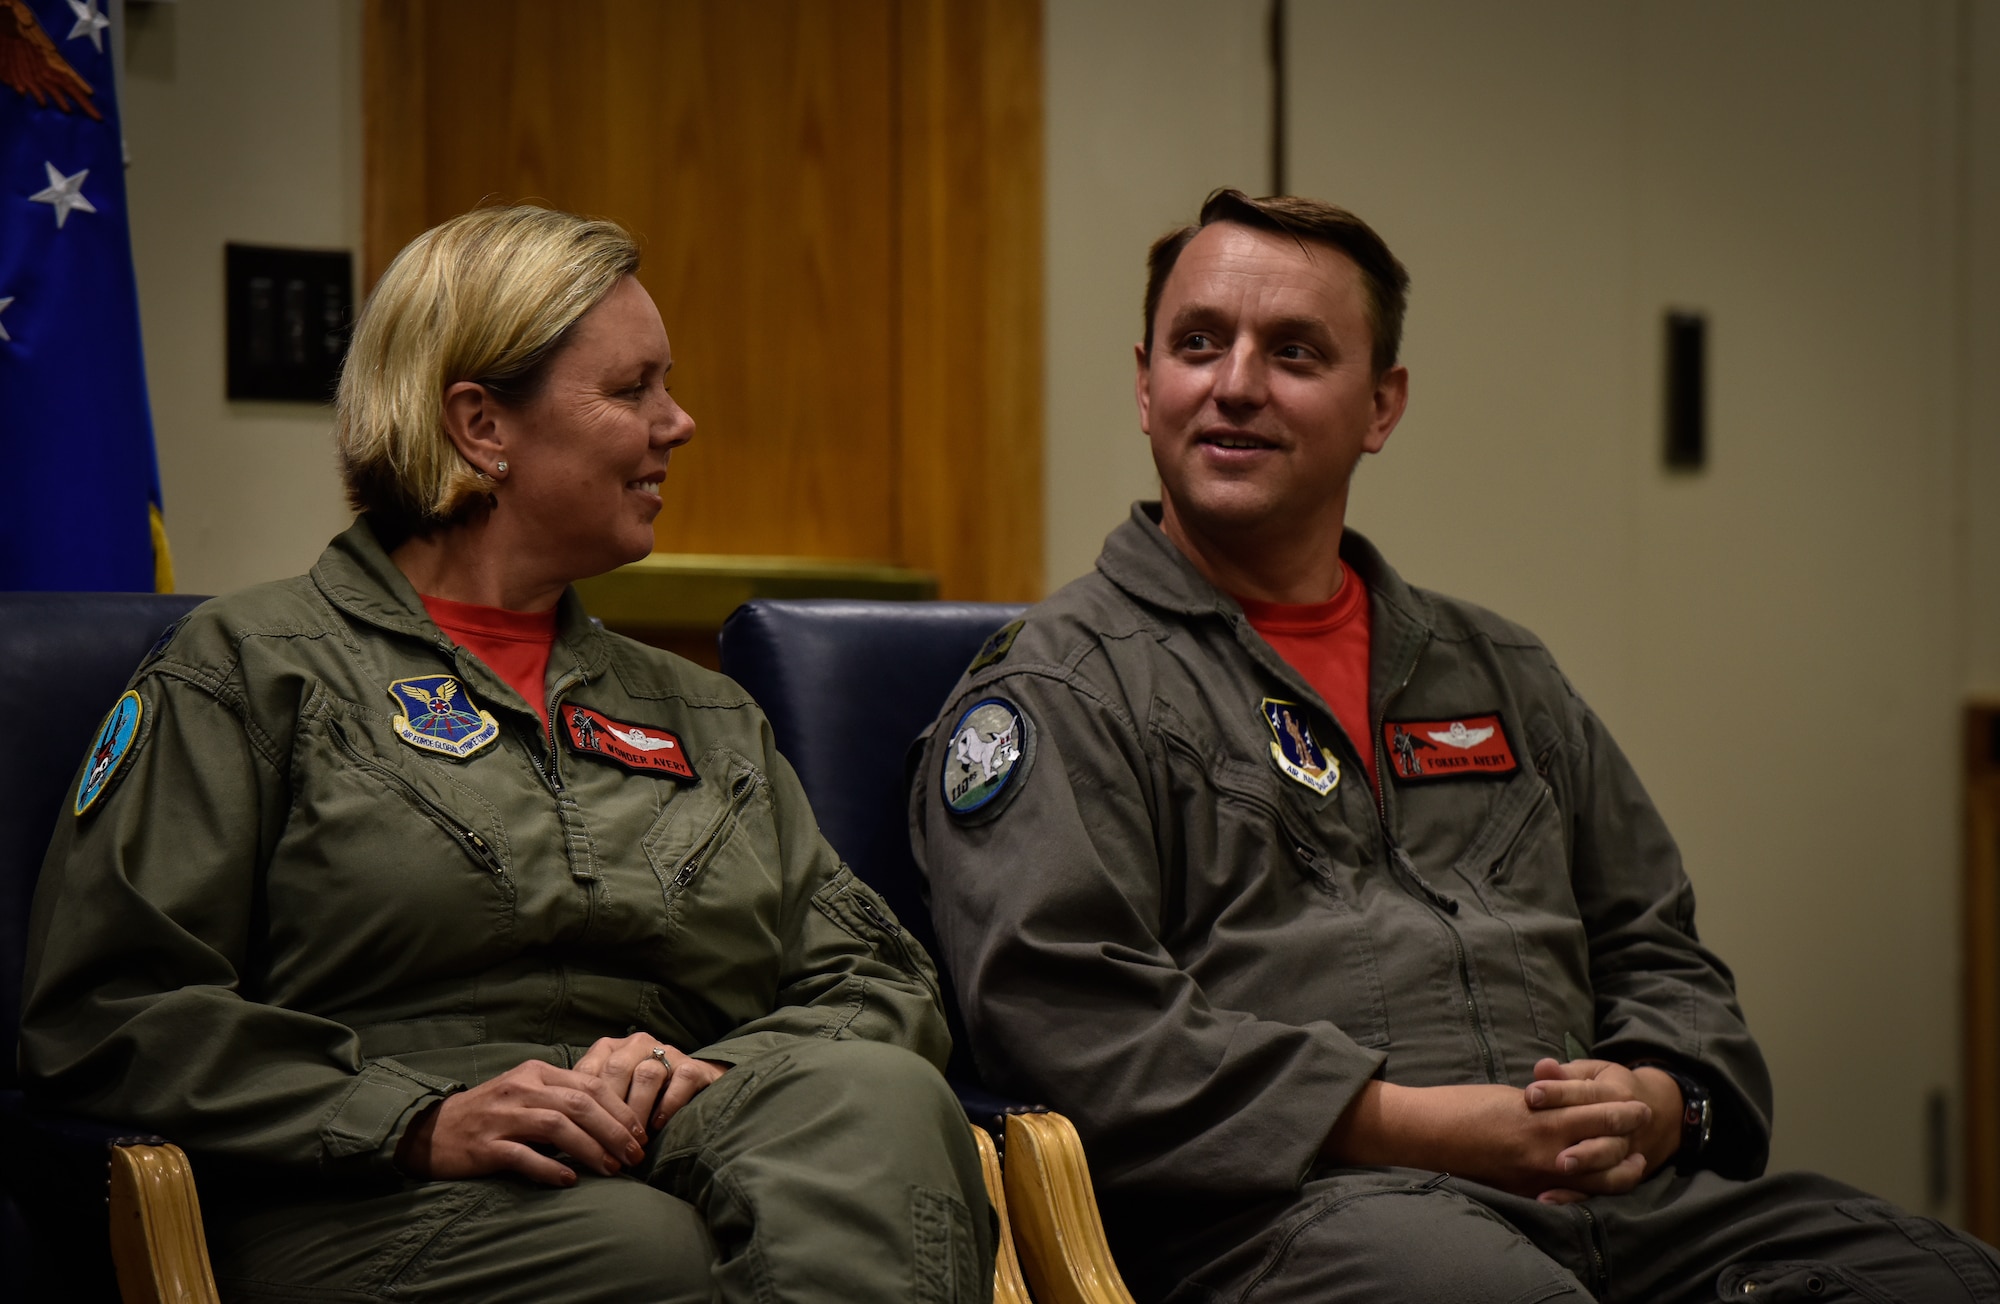 (From left) Lt. Cols. Jennifer and John Avery sit together during their retirement ceremony Sept. 7, 2018 at Whiteman Air Force Base, Missouri. The Averys were the first husband-wife team to fly the B-2. The couple served with the 509th Bomb Wing at Whiteman Air Force Base and then with the base’s Missouri National Guard 131st Bomb Wing. (U.S. Air Force photo by Tech. Sgt. Alexander W. Riedel)